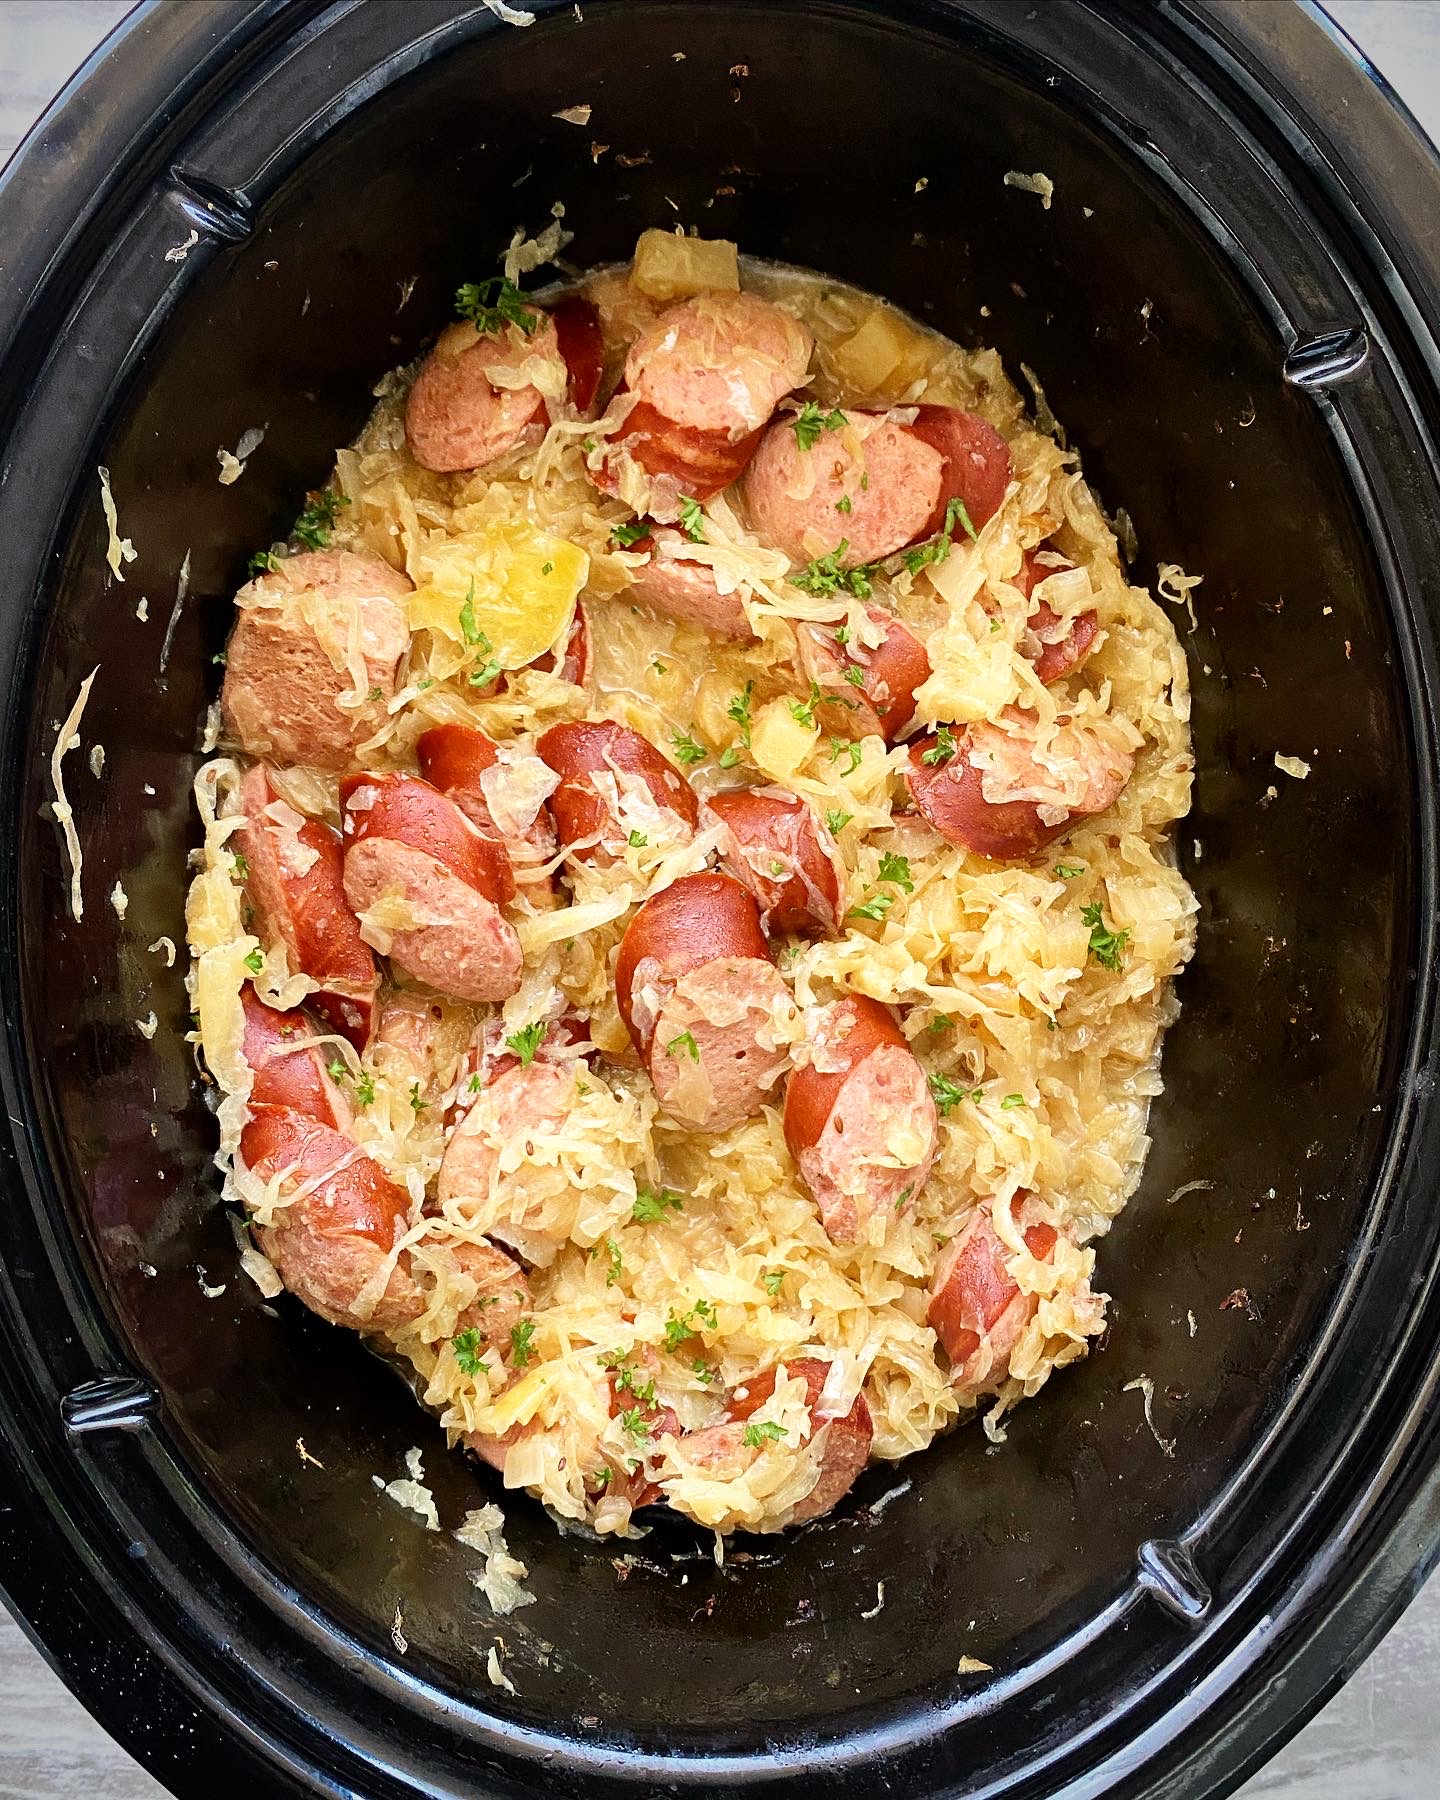 cooked Slow Cooker Sausage & Sauerkraut in the slow cooker